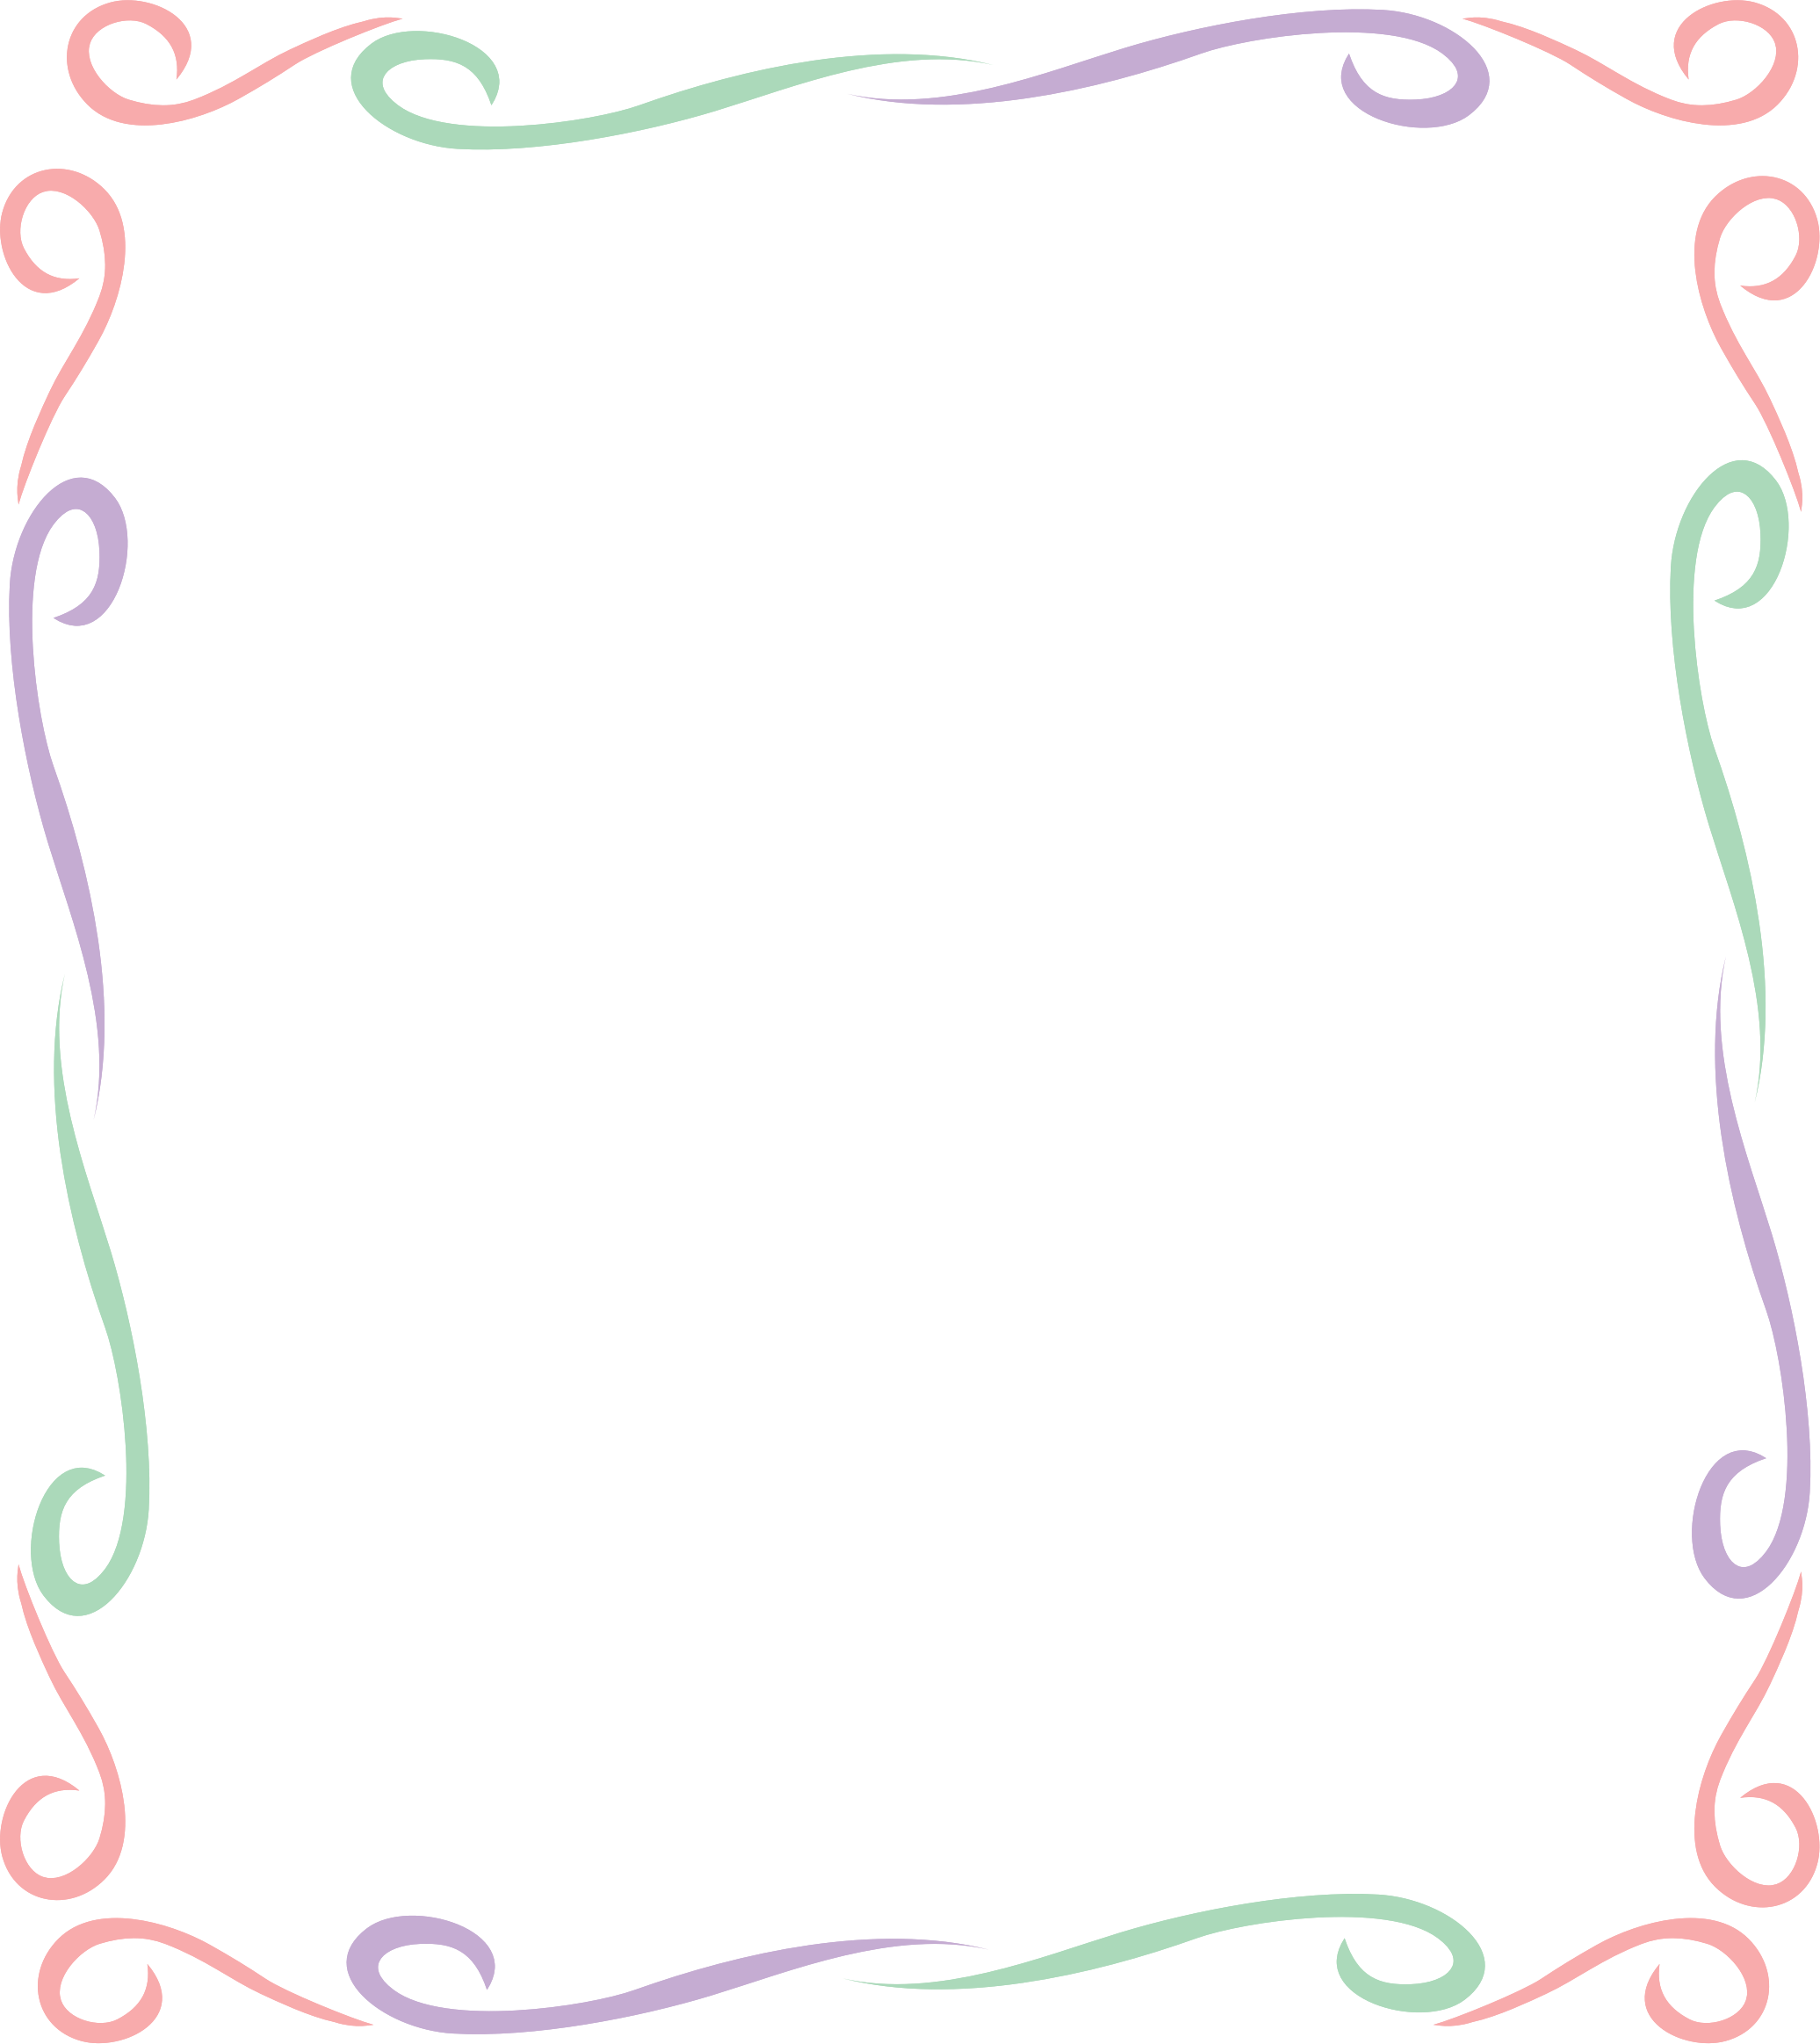 Divider clipart pink. Colourful frame icons png